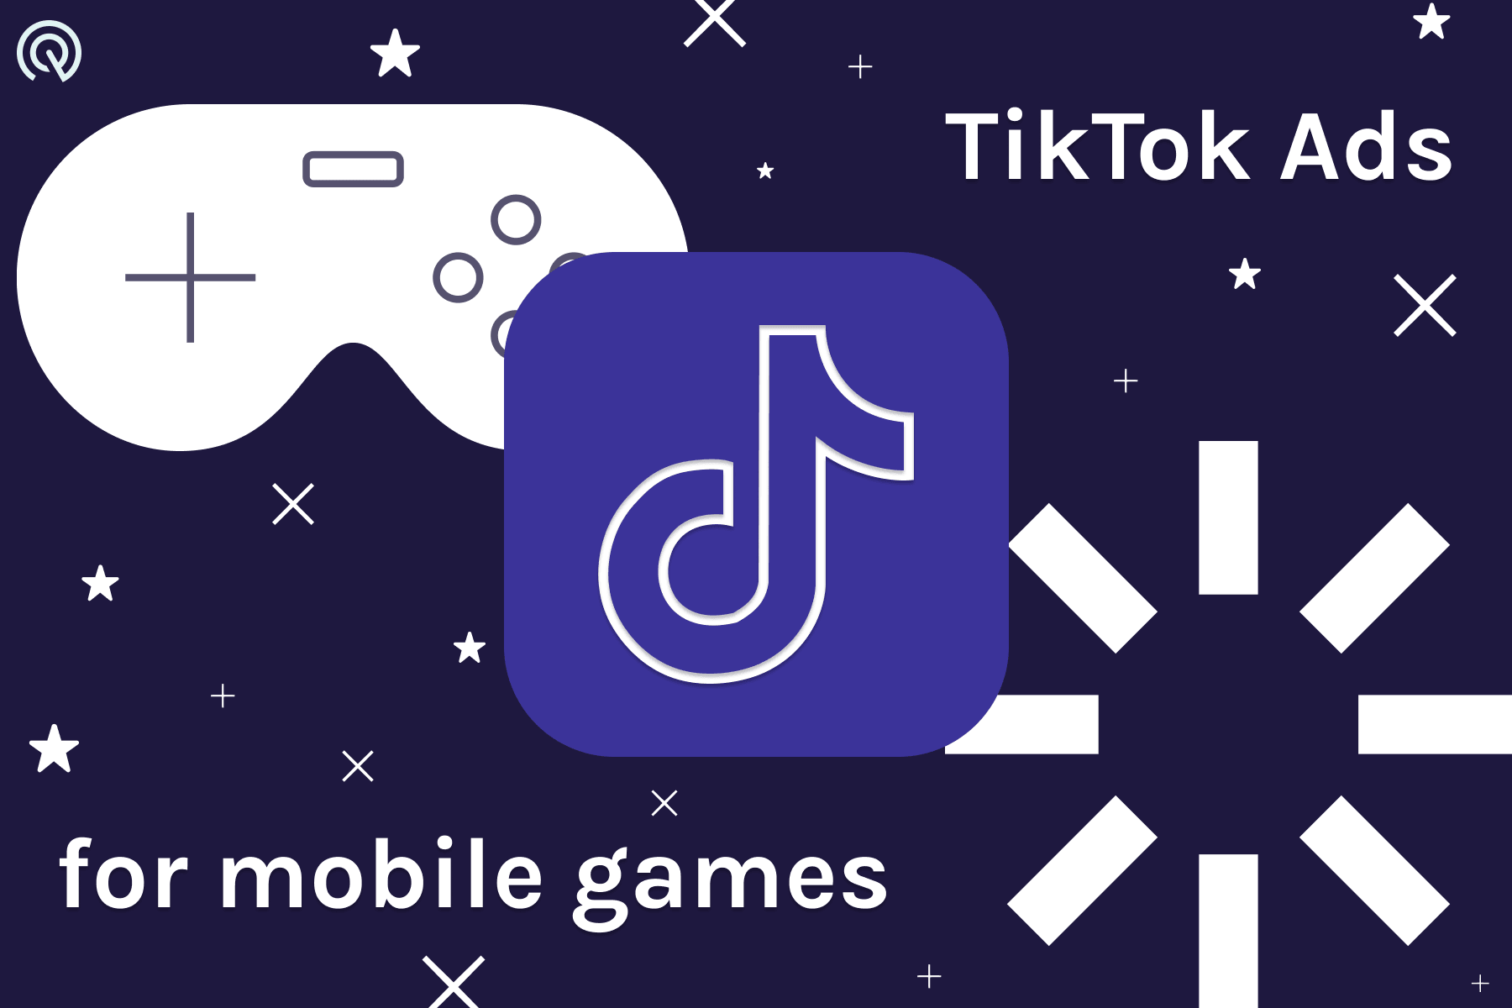 How to Use TikTok Ads to Boost Game Sales